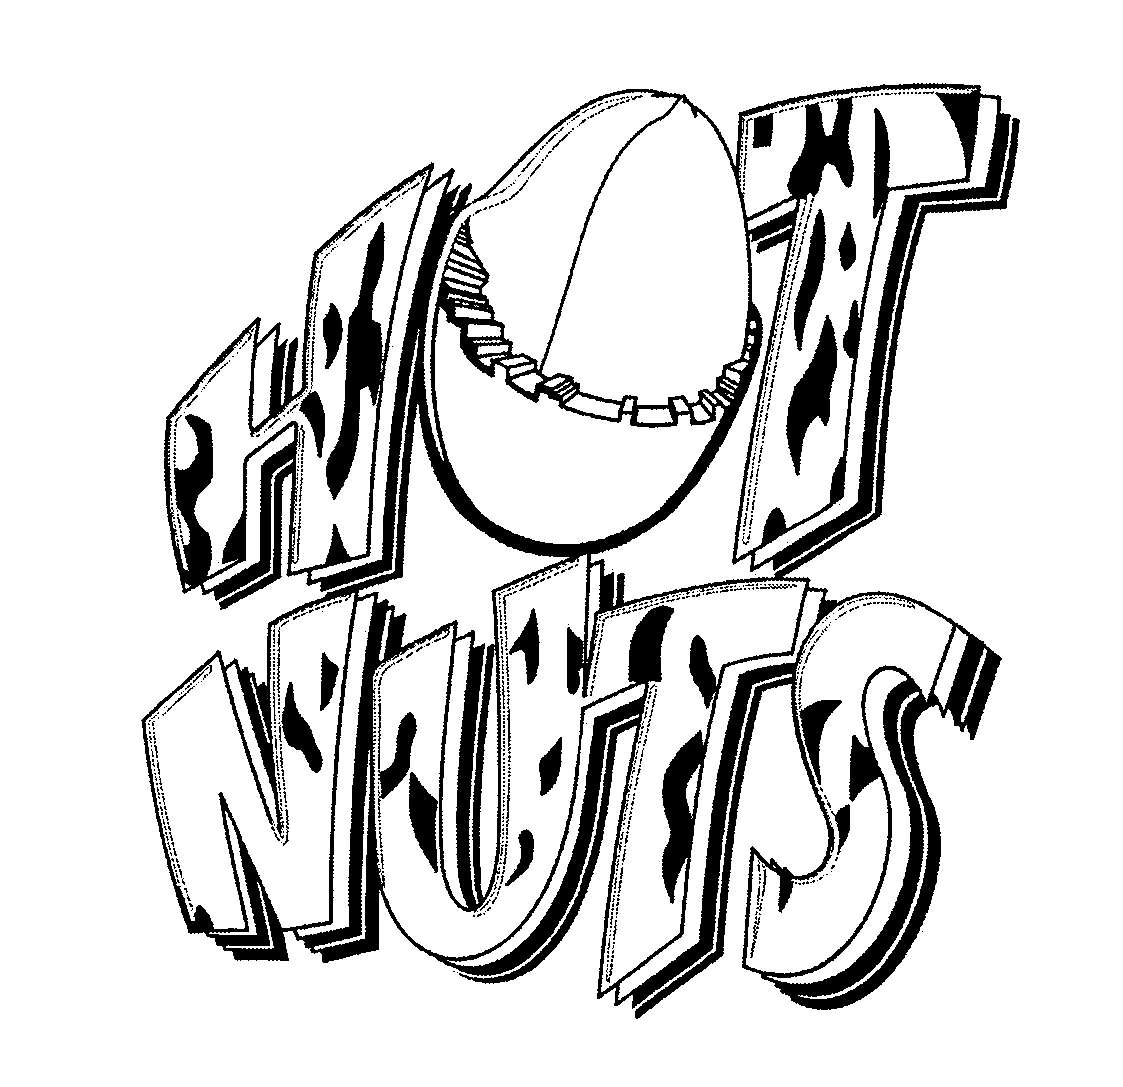  HOT NUTS